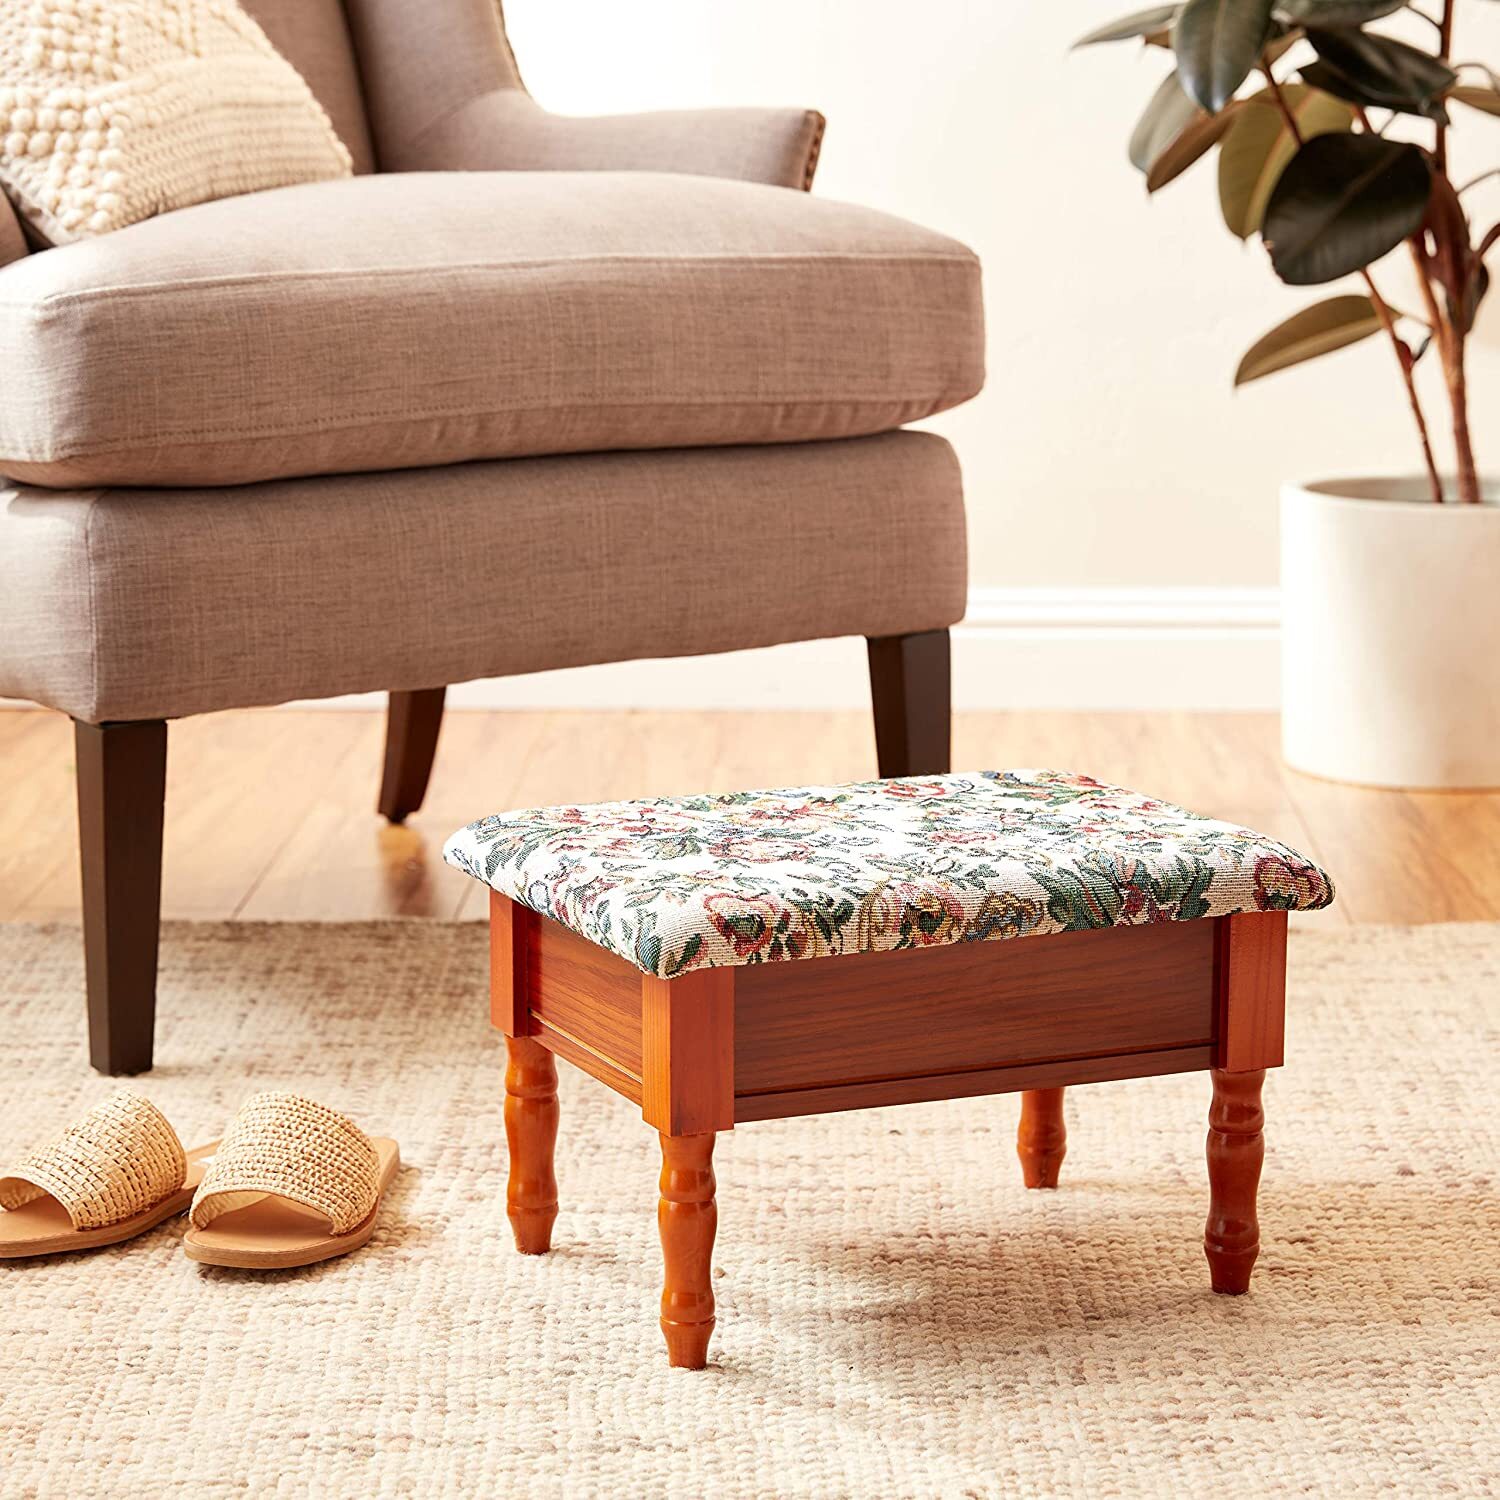 Small upholstered footstool made of wood